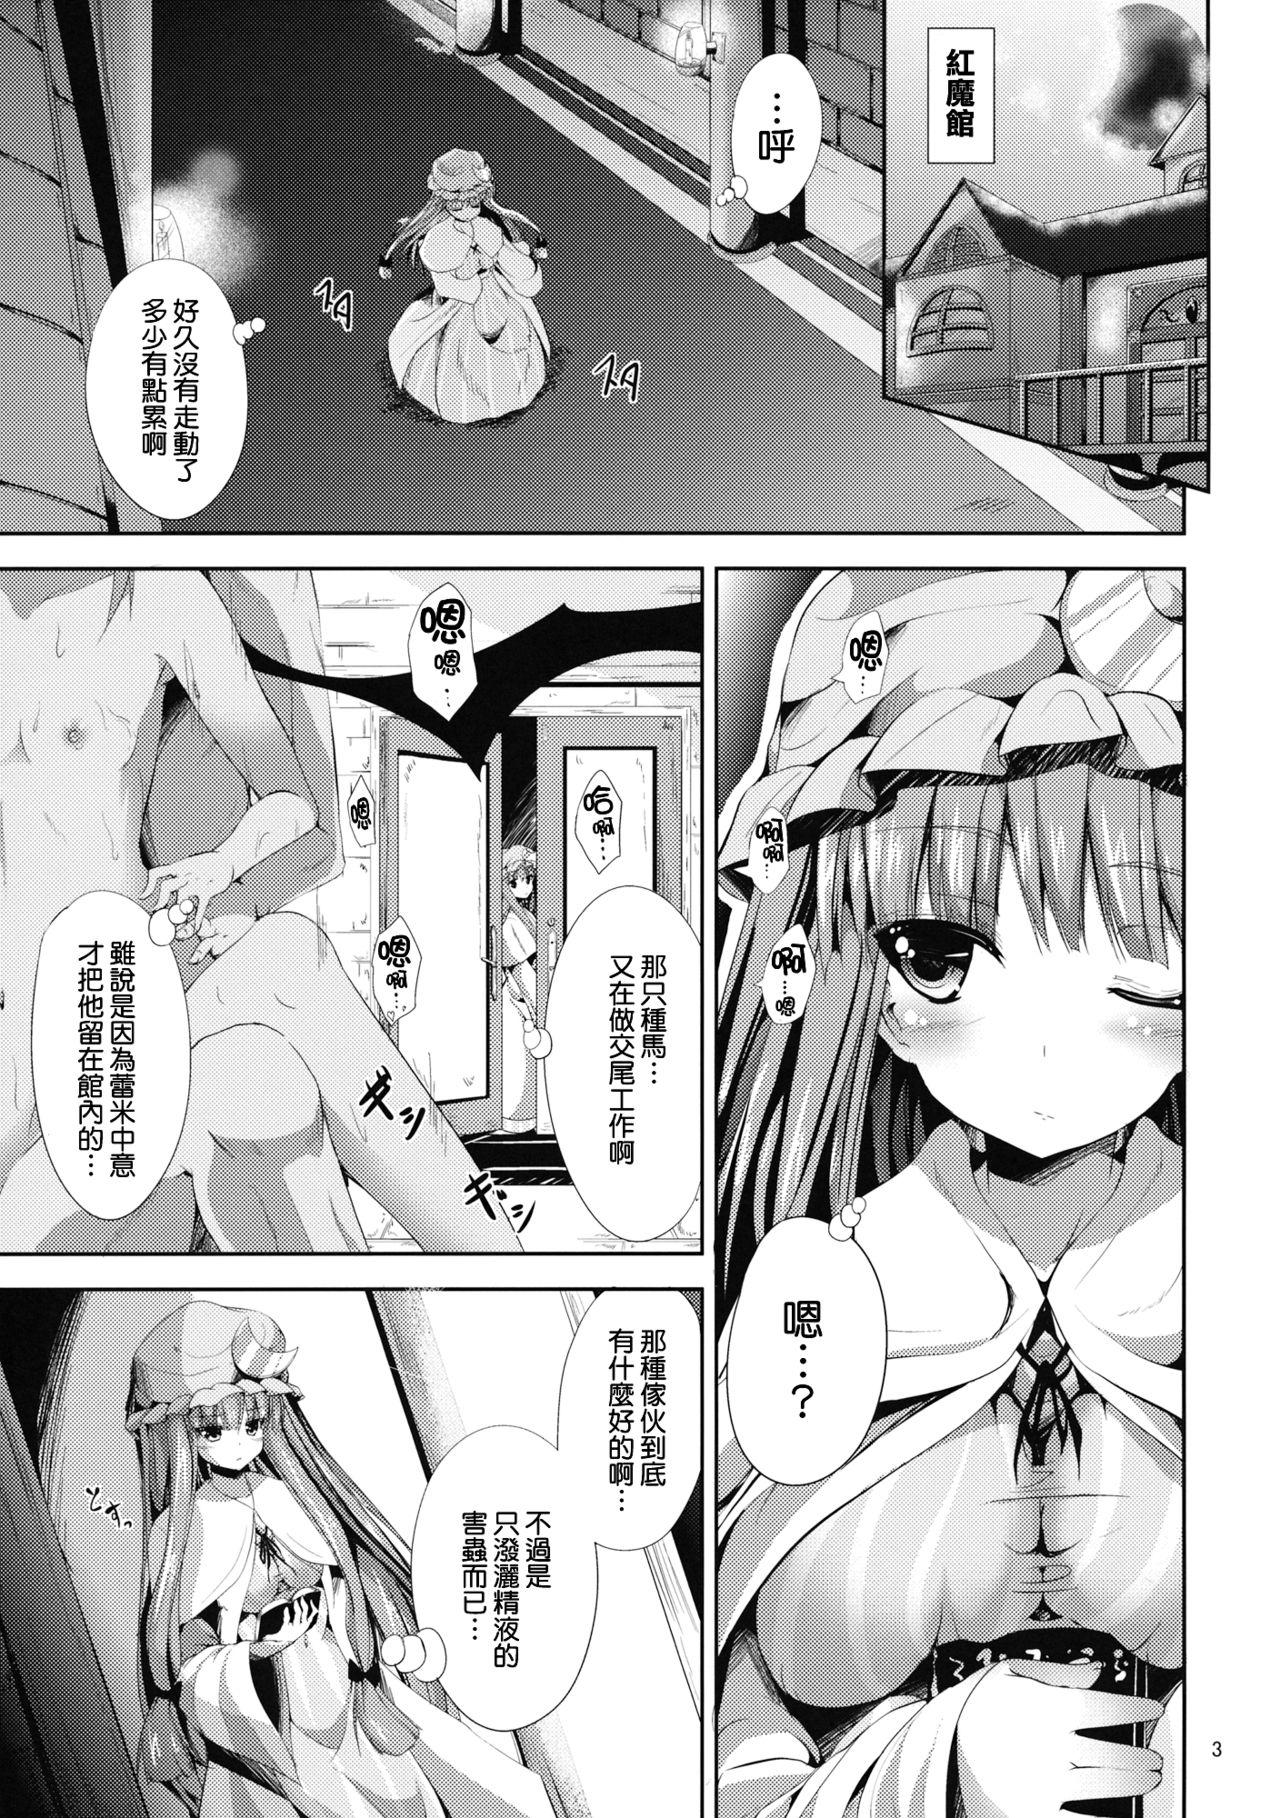 Harcore Sweet nothingS - Touhou project Sucking Dick - Page 3